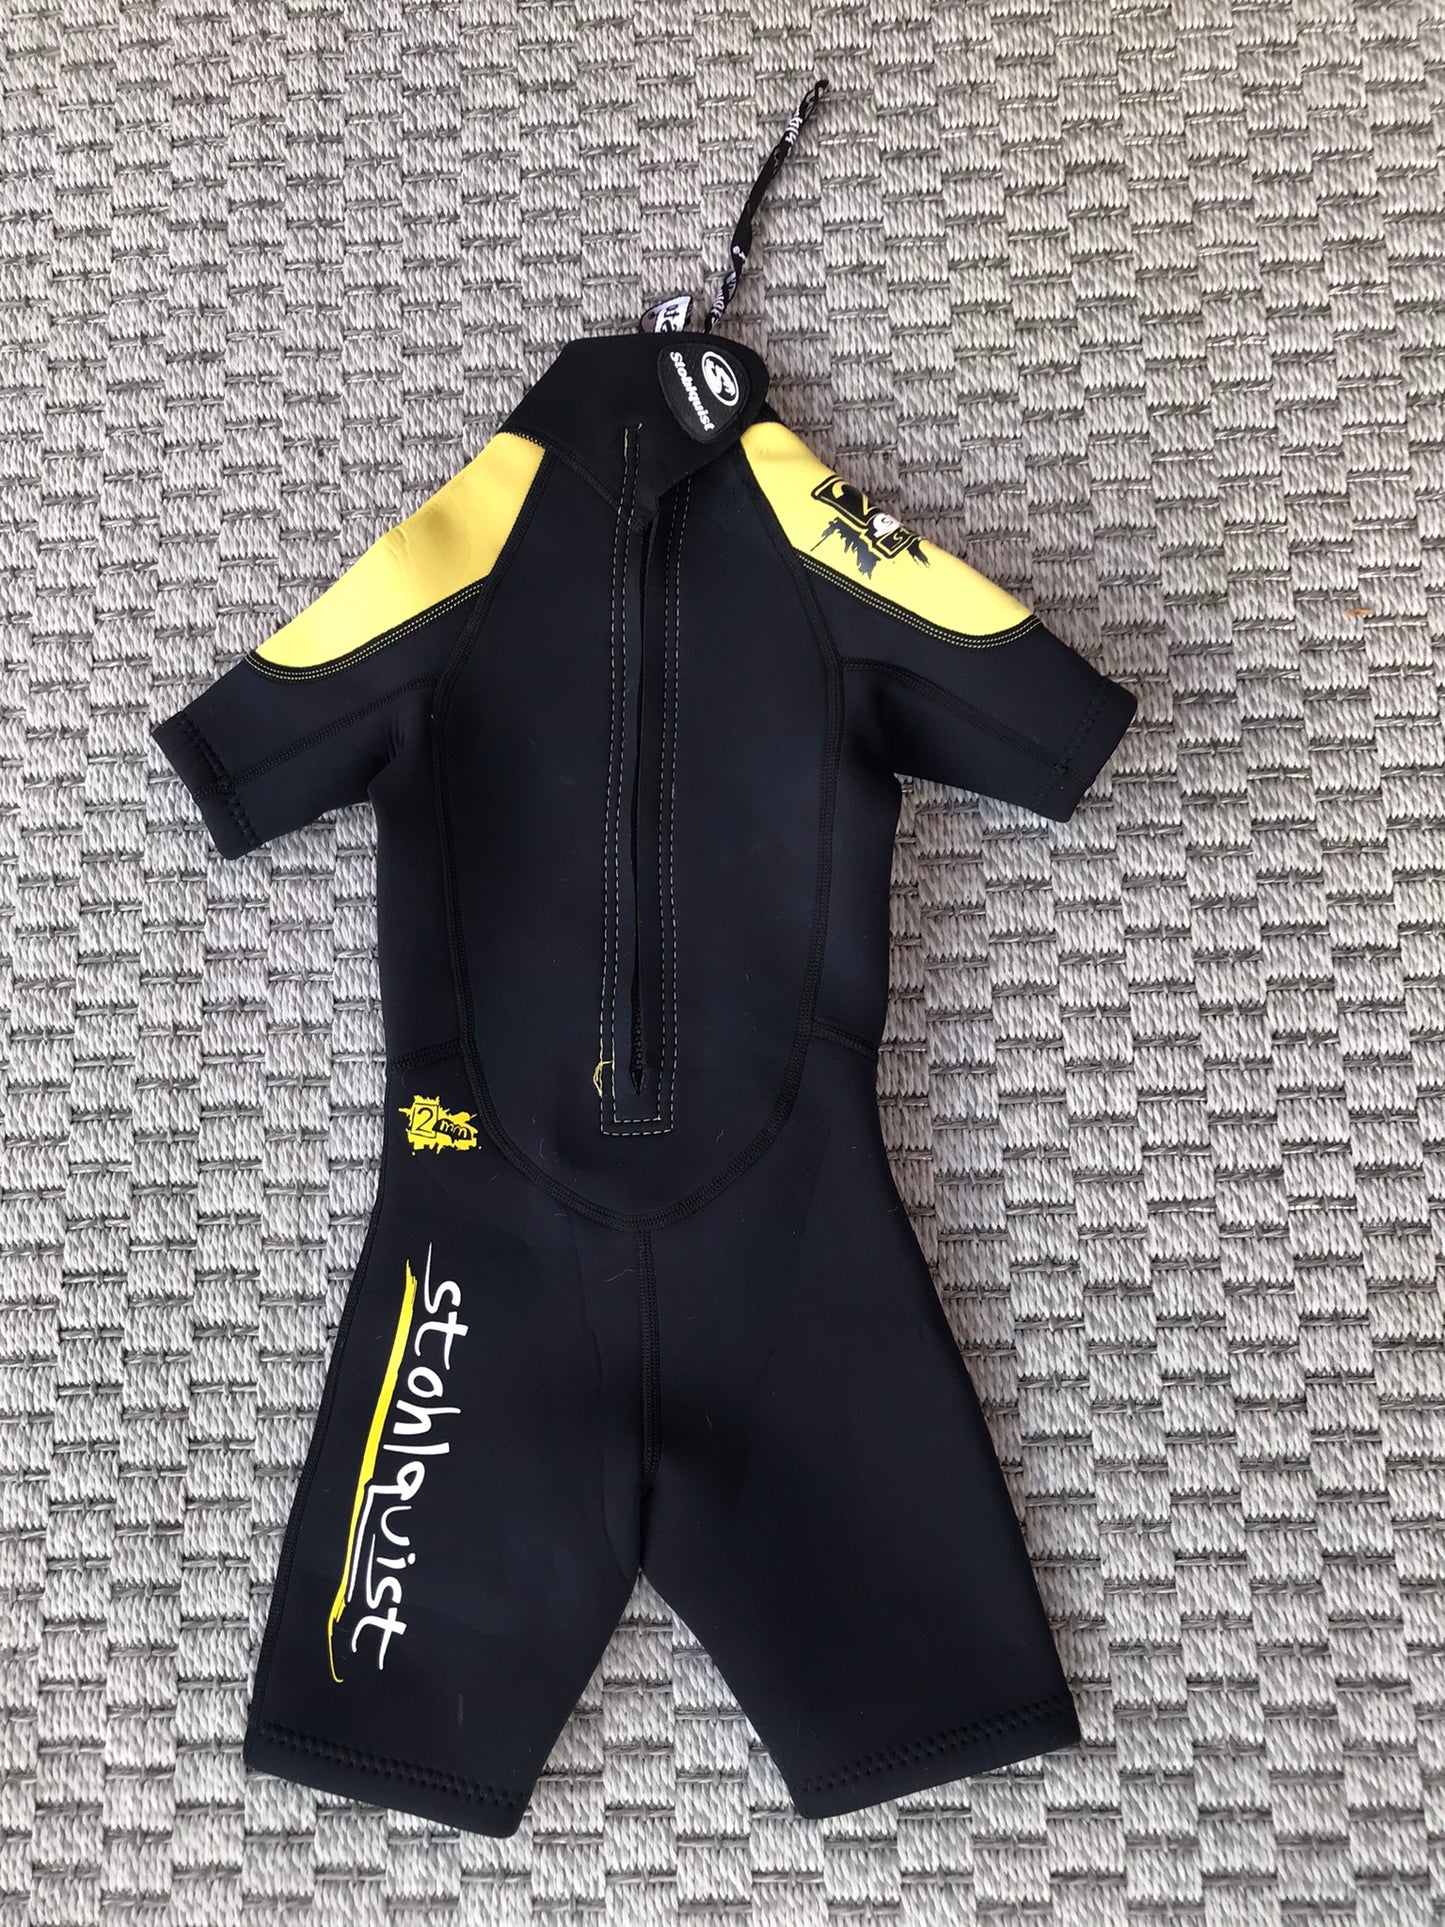 Wetsuit Child Size 4-6 XX-Small Stohlquist Black Lime 2-3 mm Neoprene